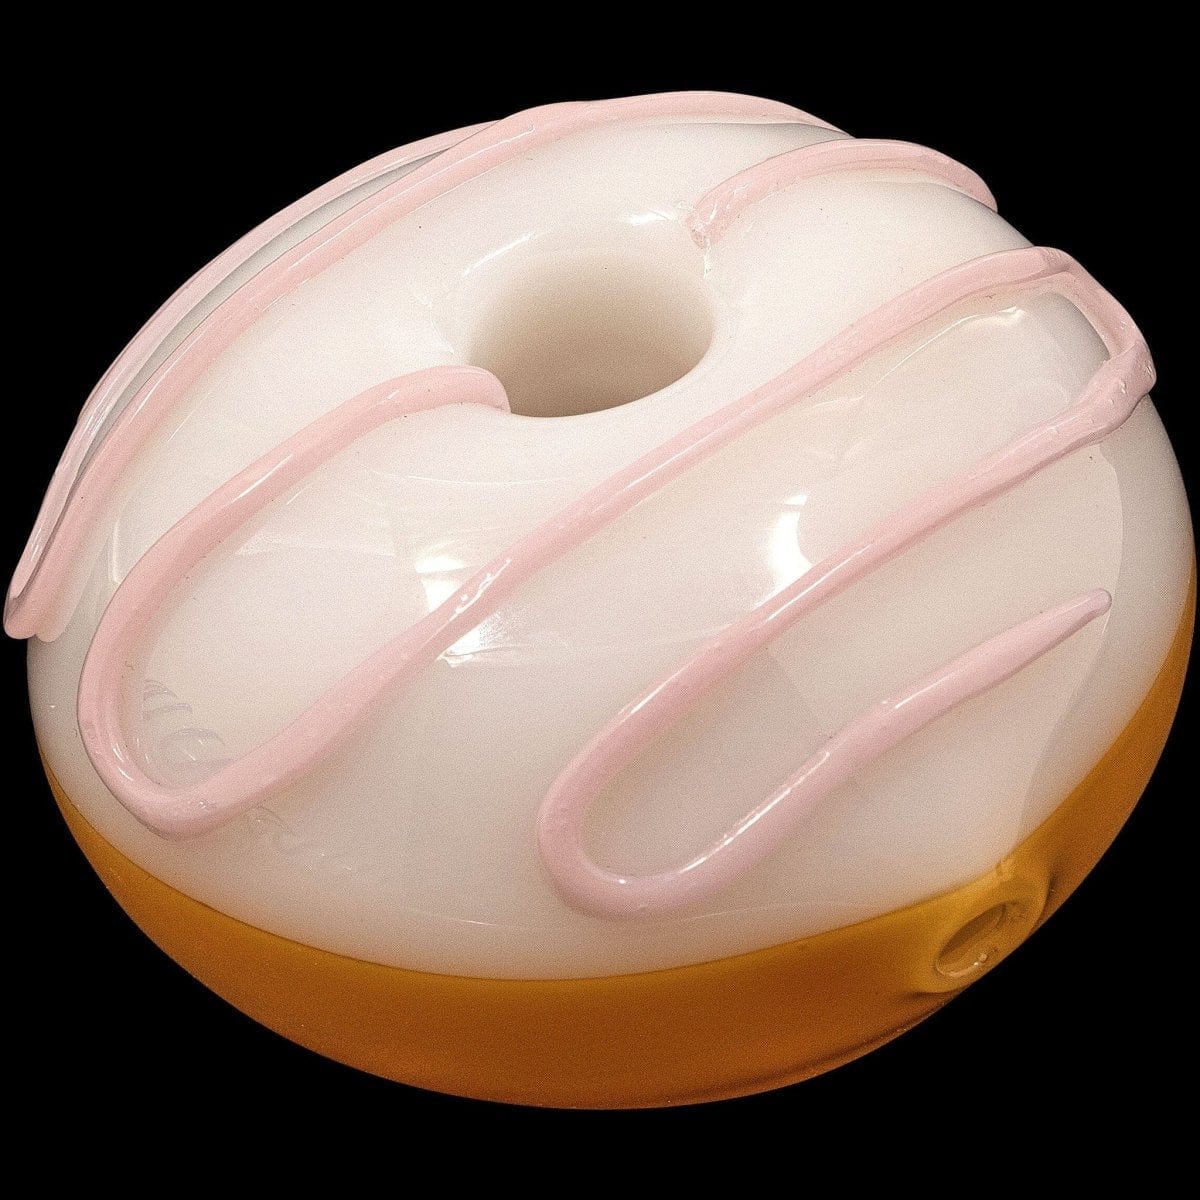 LA Pipes Hand Pipe Strawberry Frosting "Frosted Donut" Glass Pipe